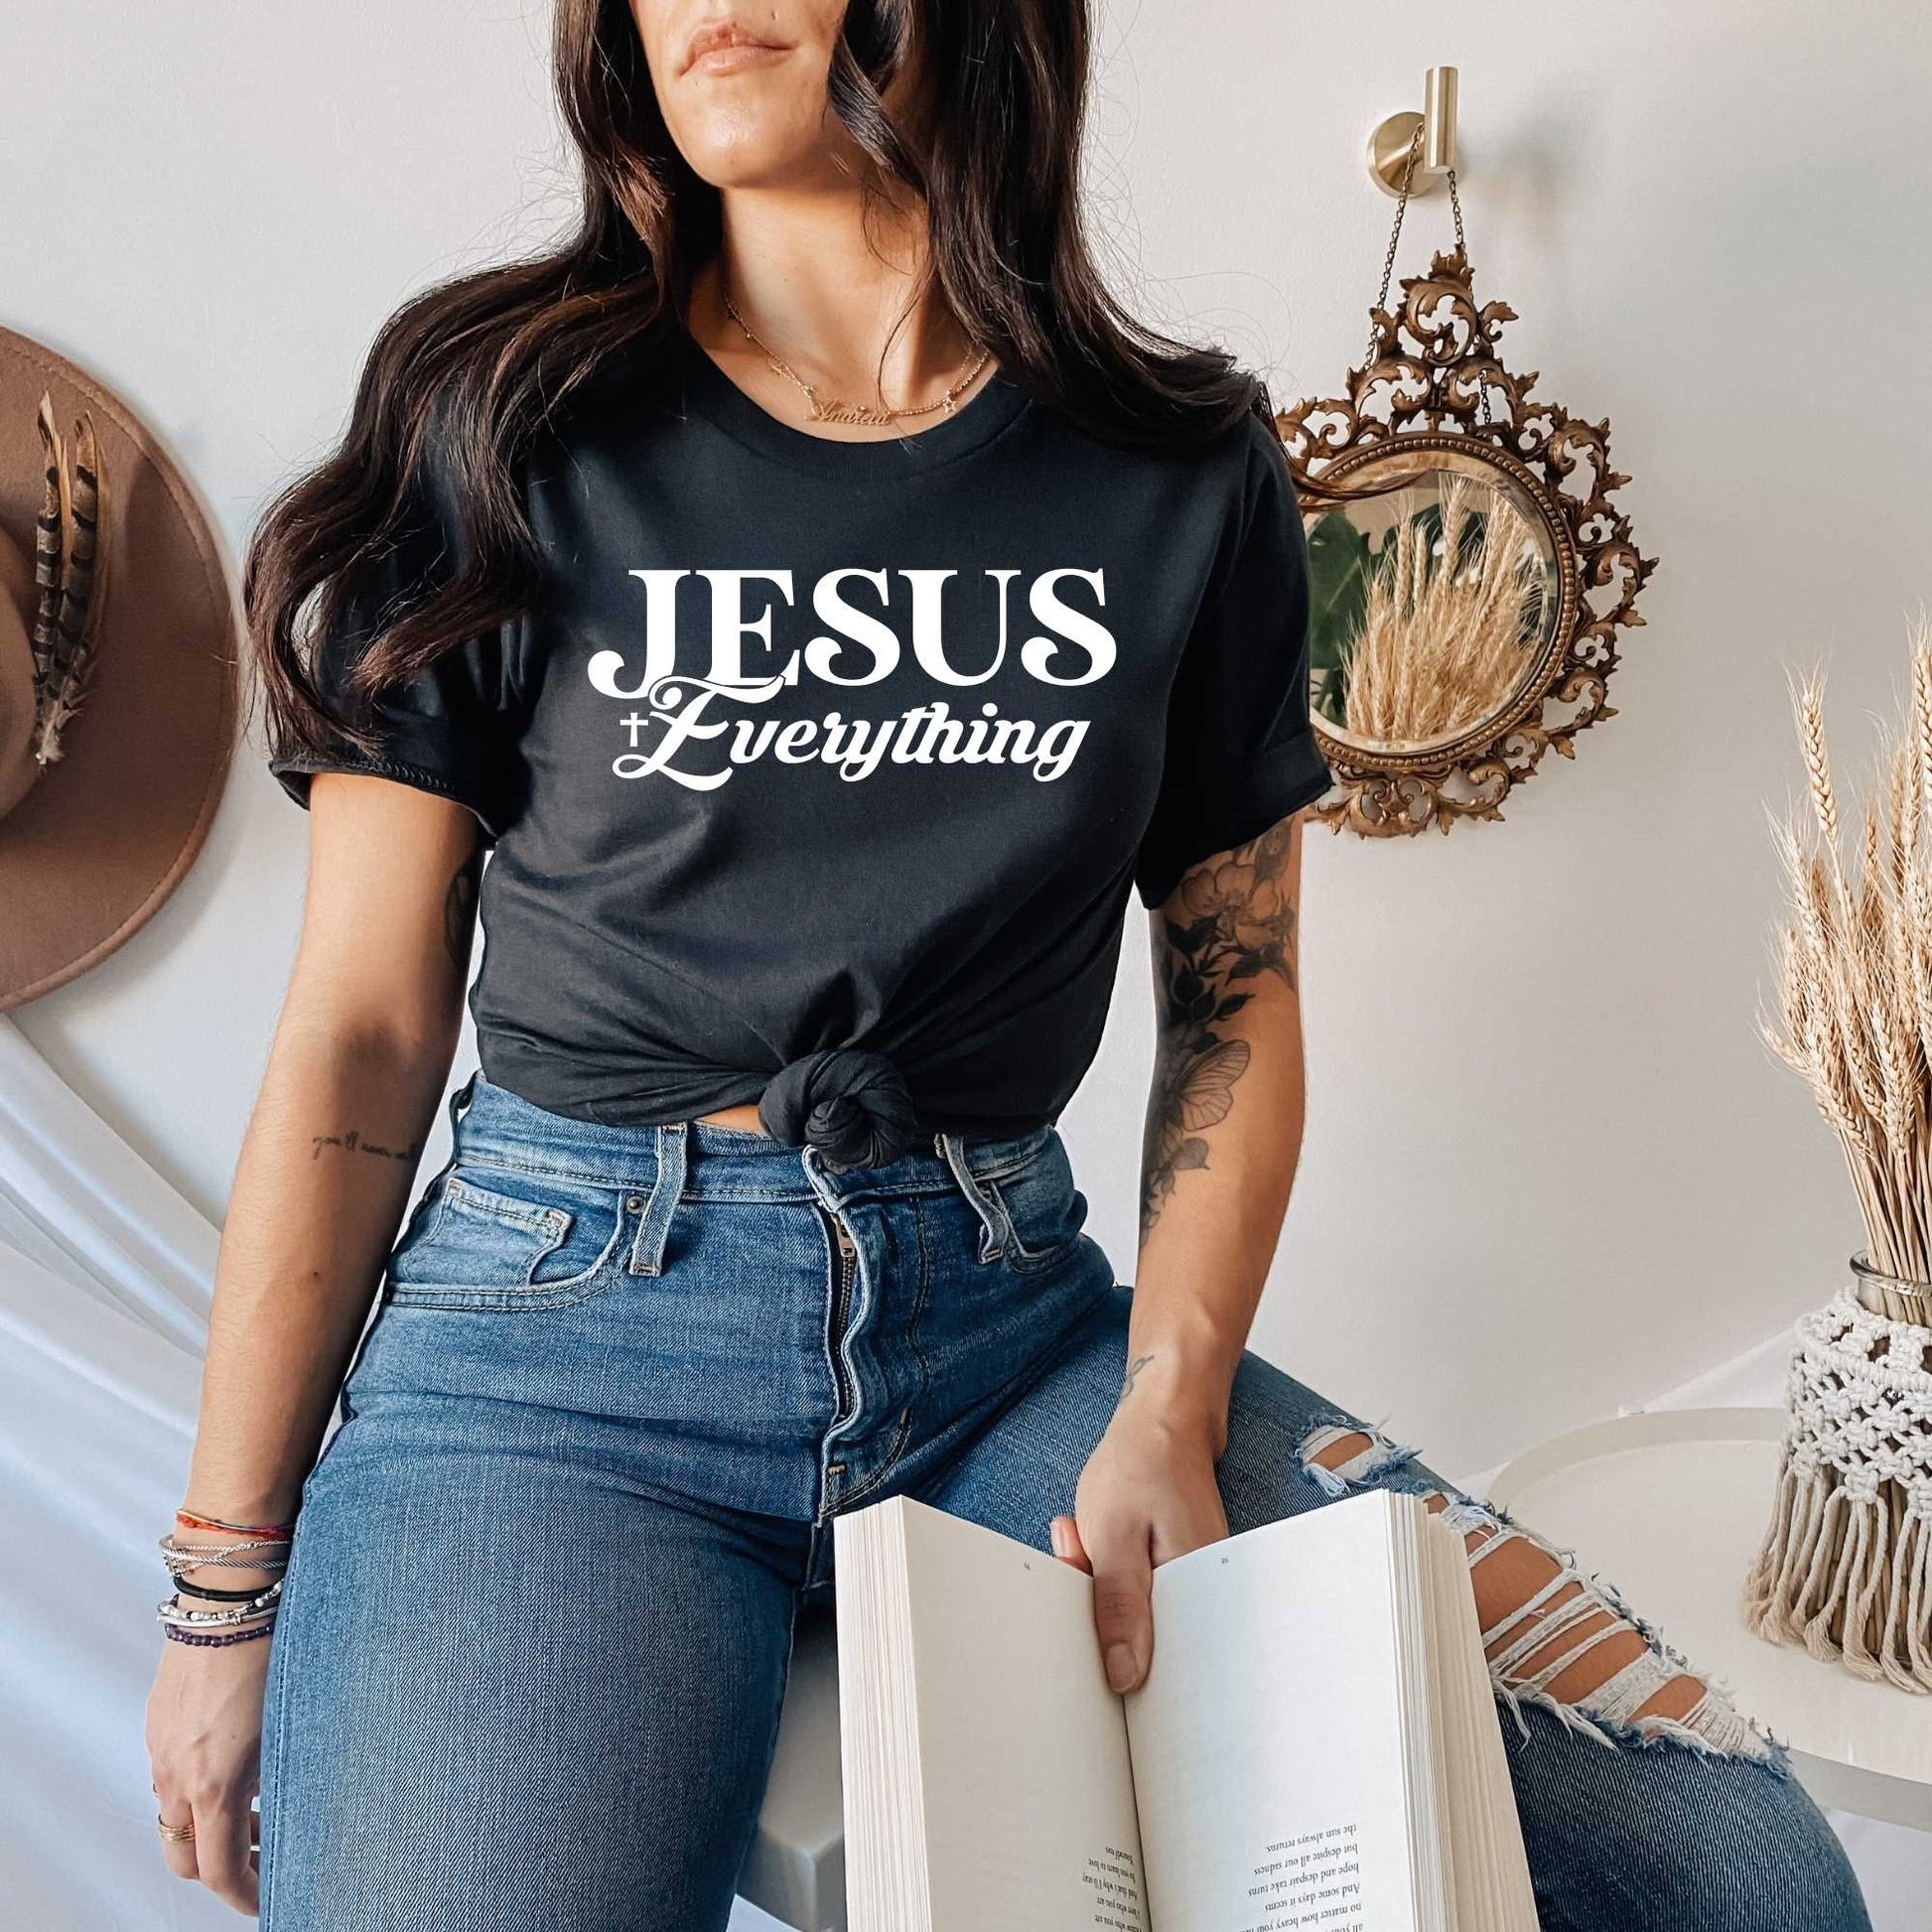 Jesus is Everything Shirt about Jesus for Women or Men